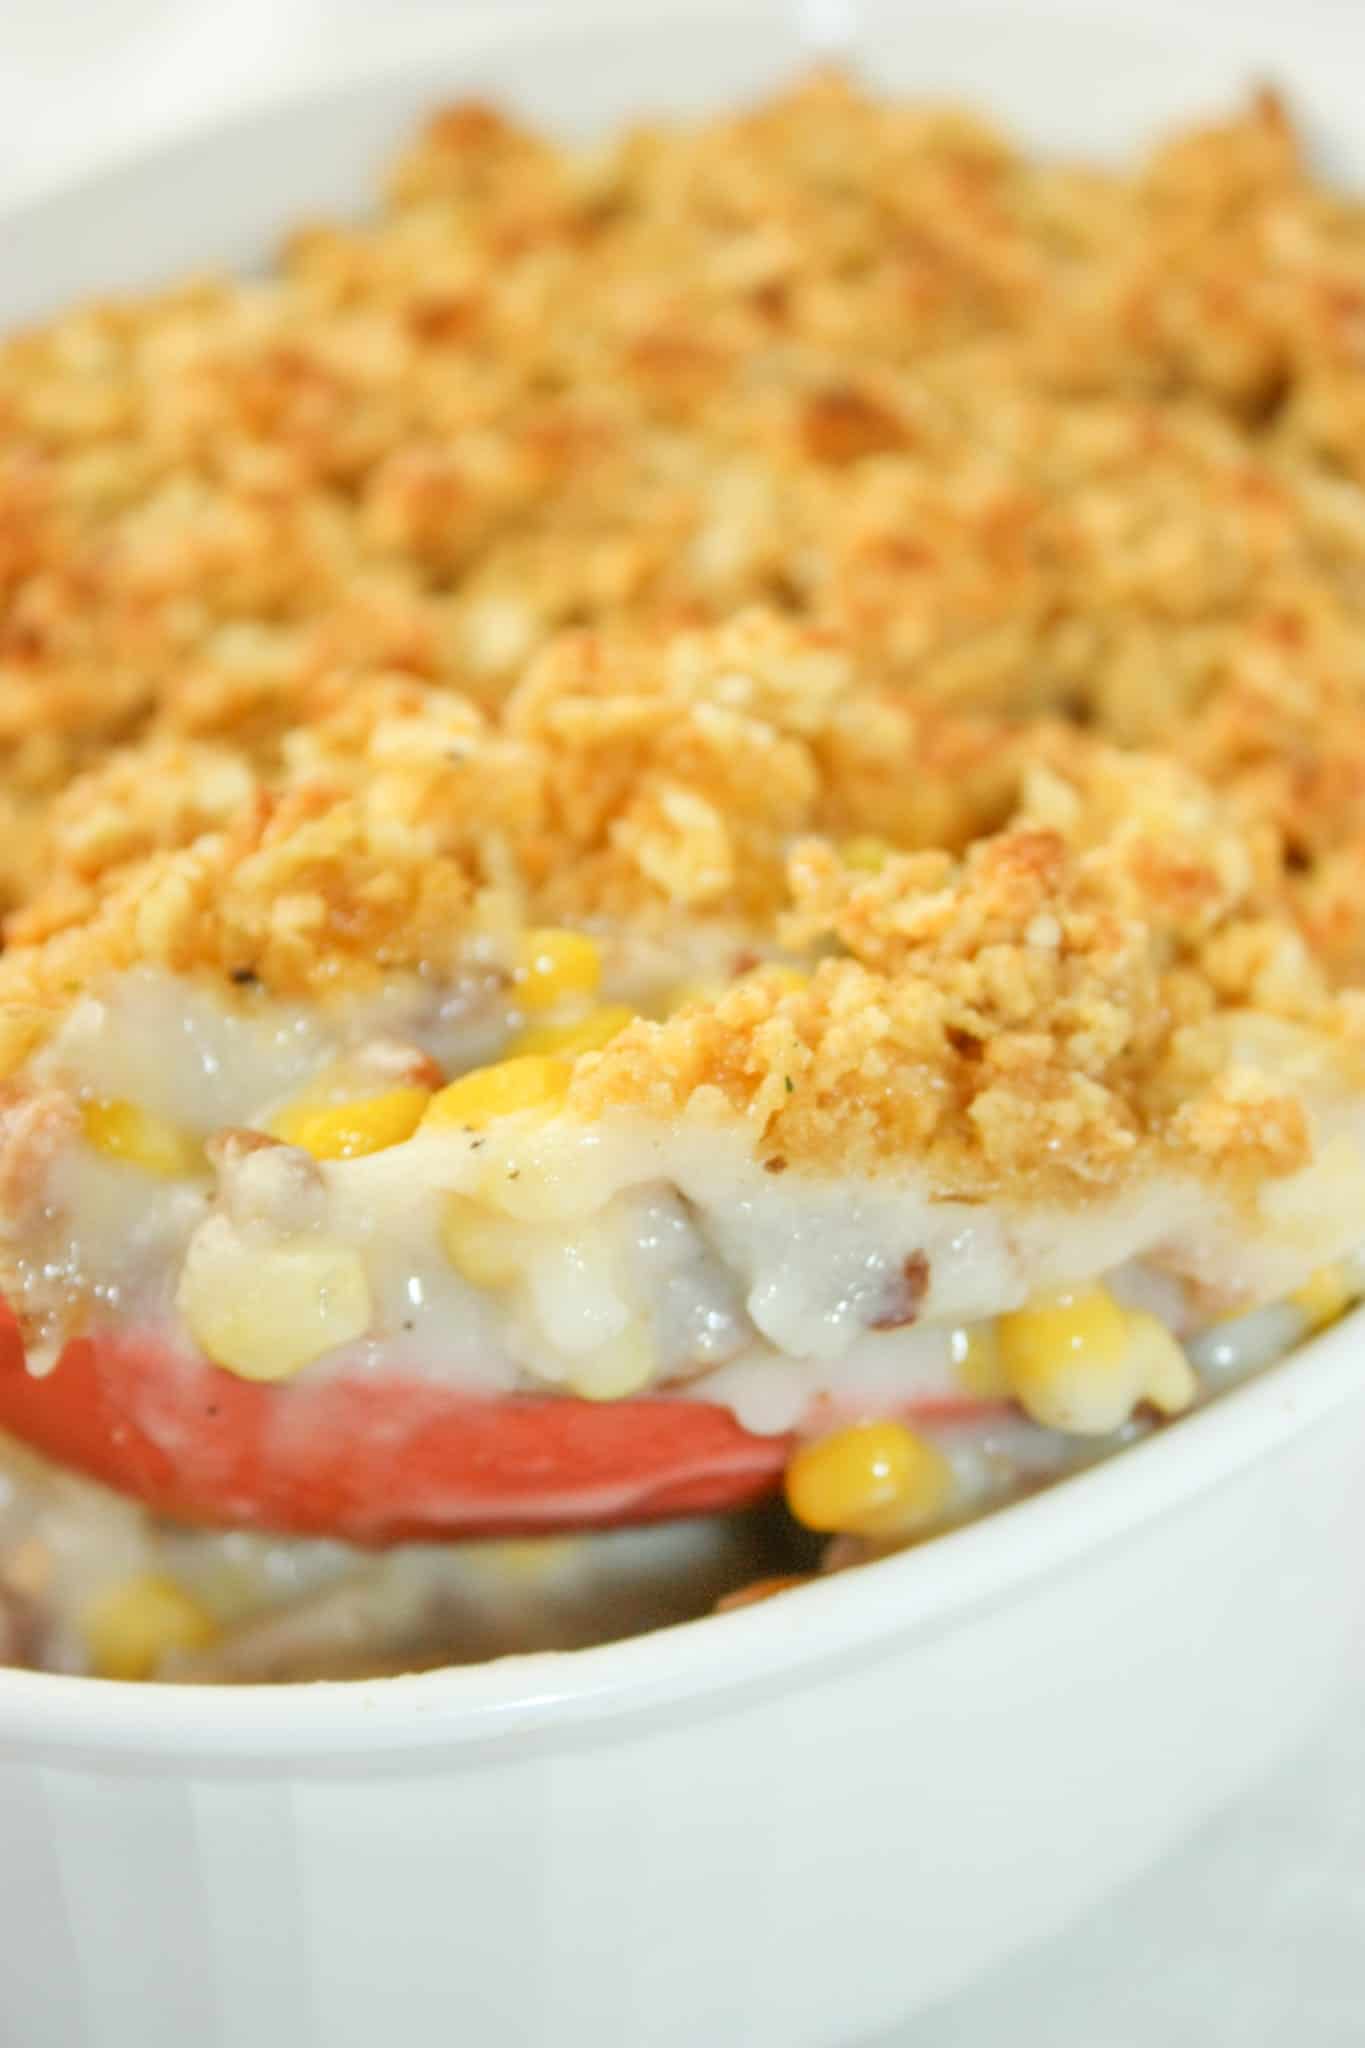 Gluten Free Corn Casserole is a quick side dish that can easily be whipped up on a busy week night.  This dairy free version uses gluten free flour as a thickener.